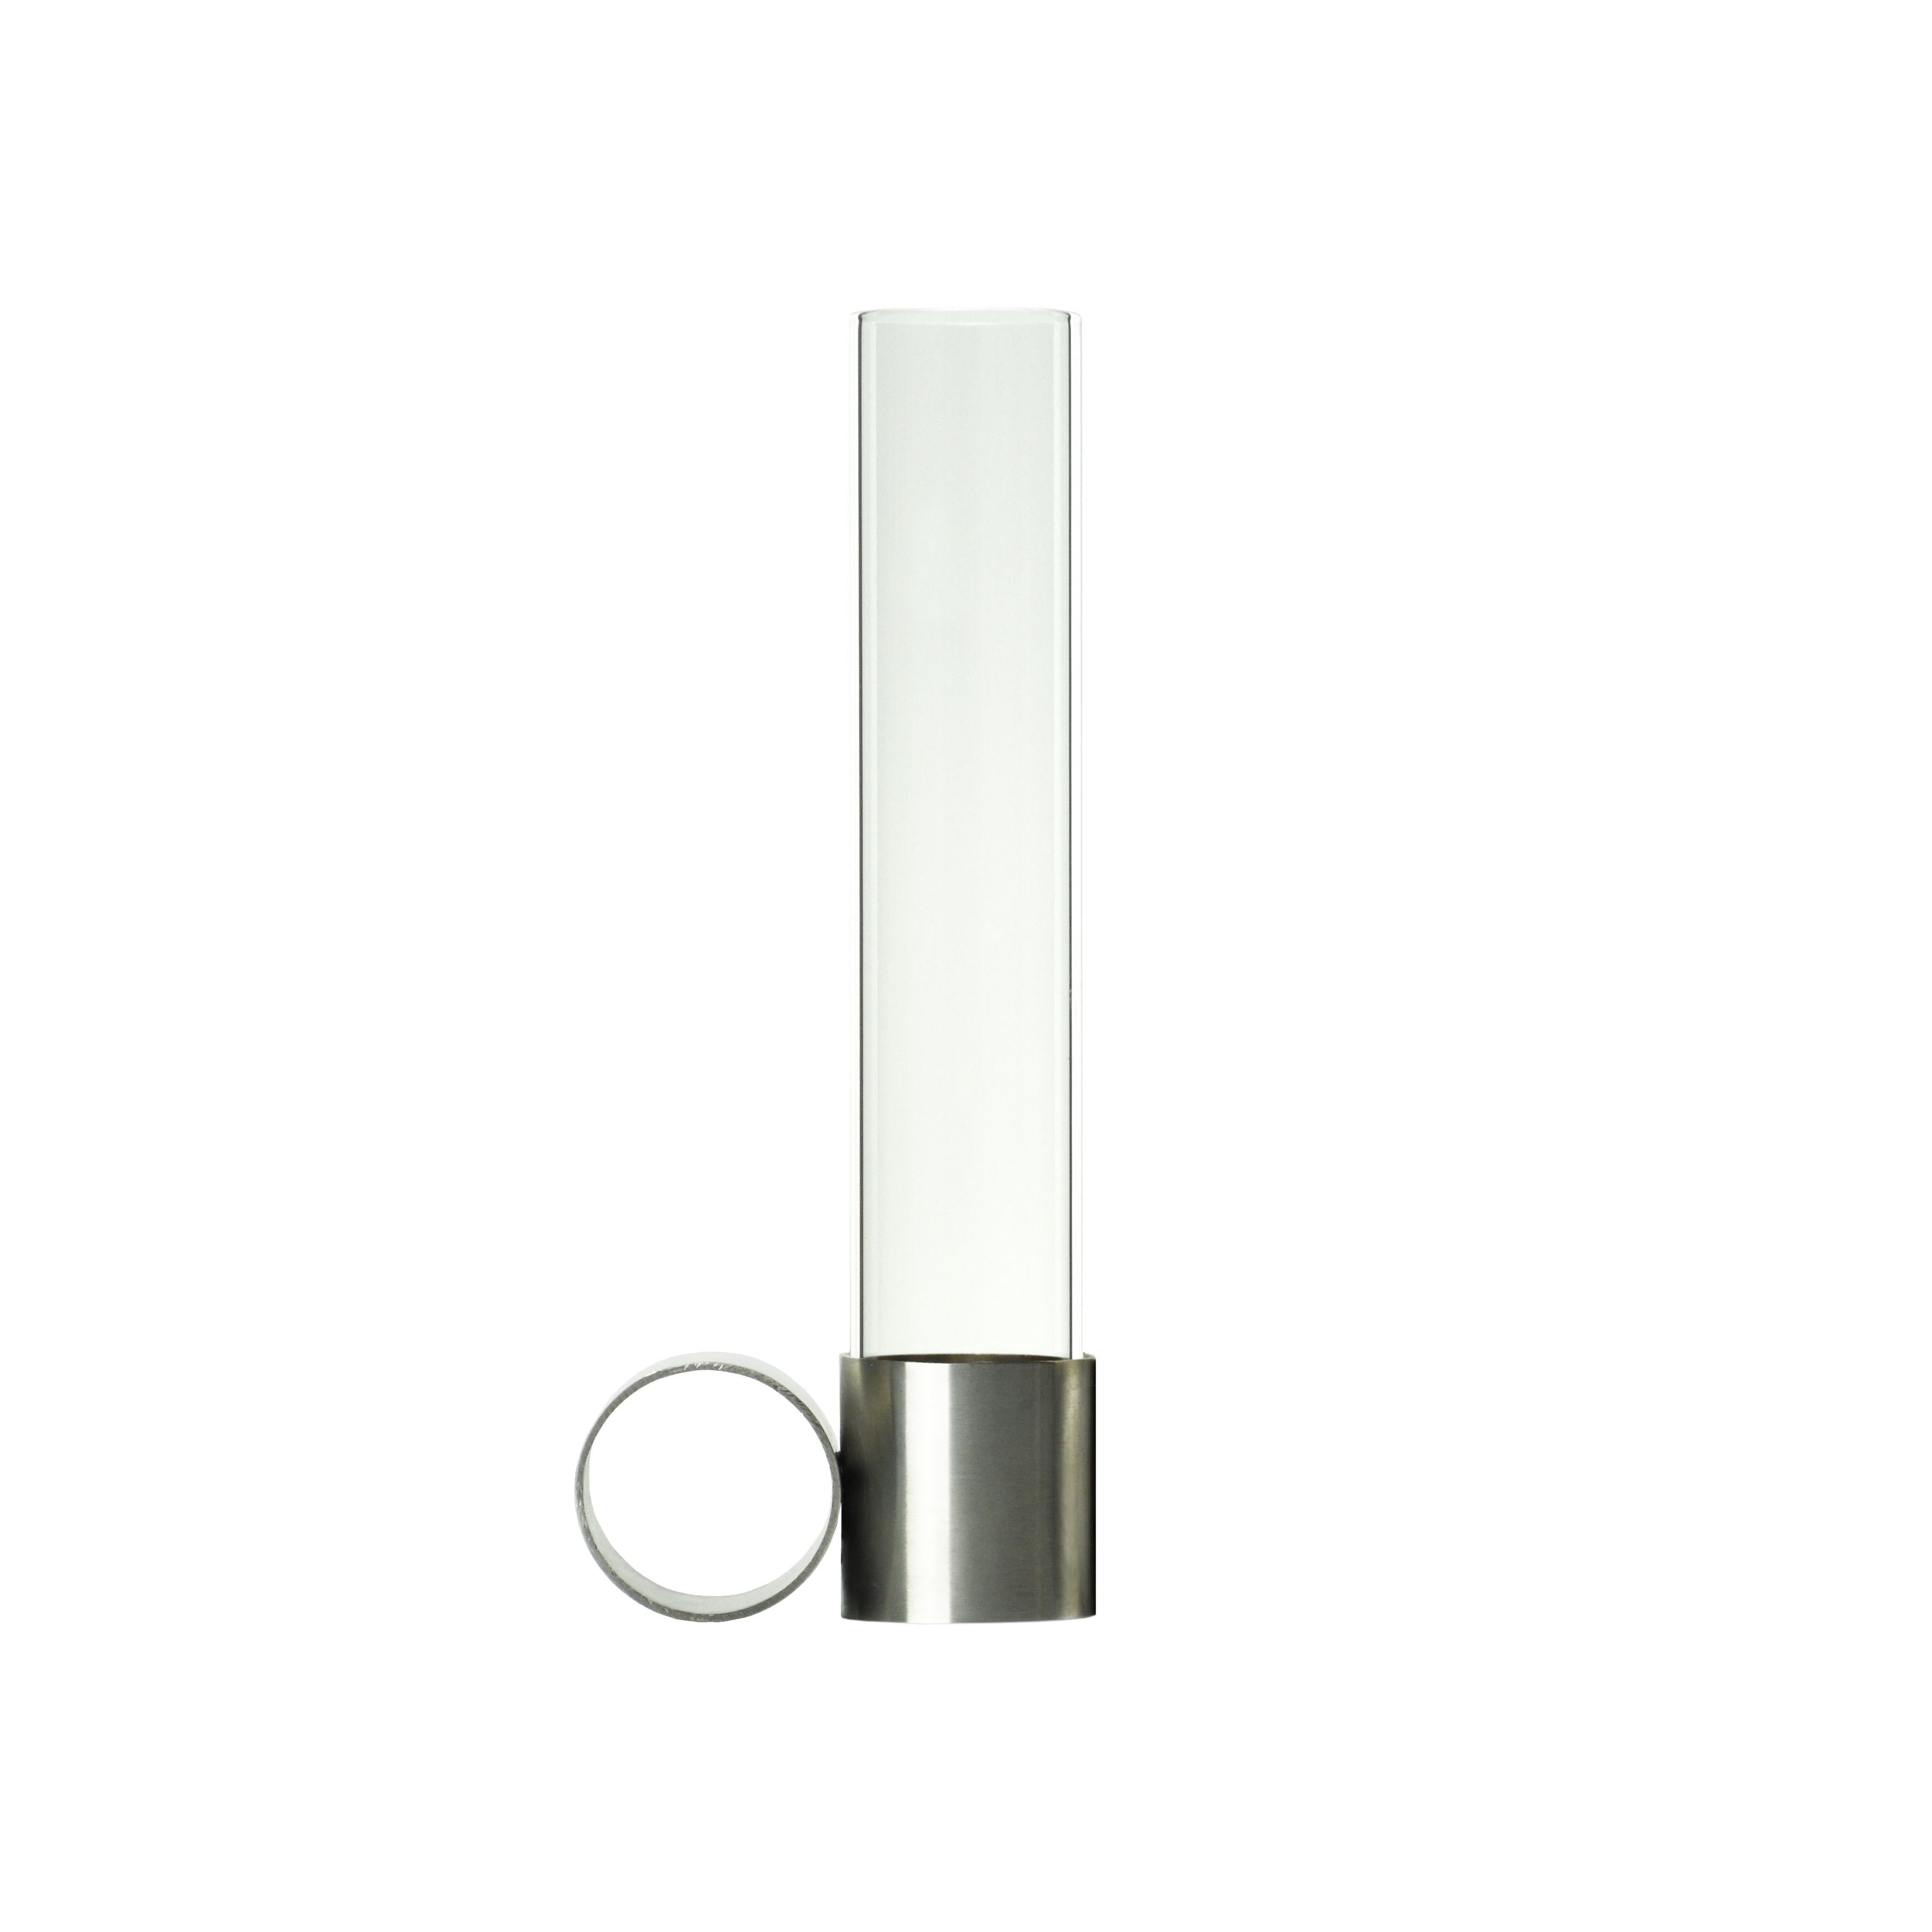 Tempio del Tempo 1 Candleholder by Coki Barbieri
Dimensions: W 4 x D 8 x H 20 cm.
Materials: stainless steel (made in Italy), borosilicate glass (made in Italy), soy wax or olive oil wax candle and TPE rubber.

FEATURES
3 divided